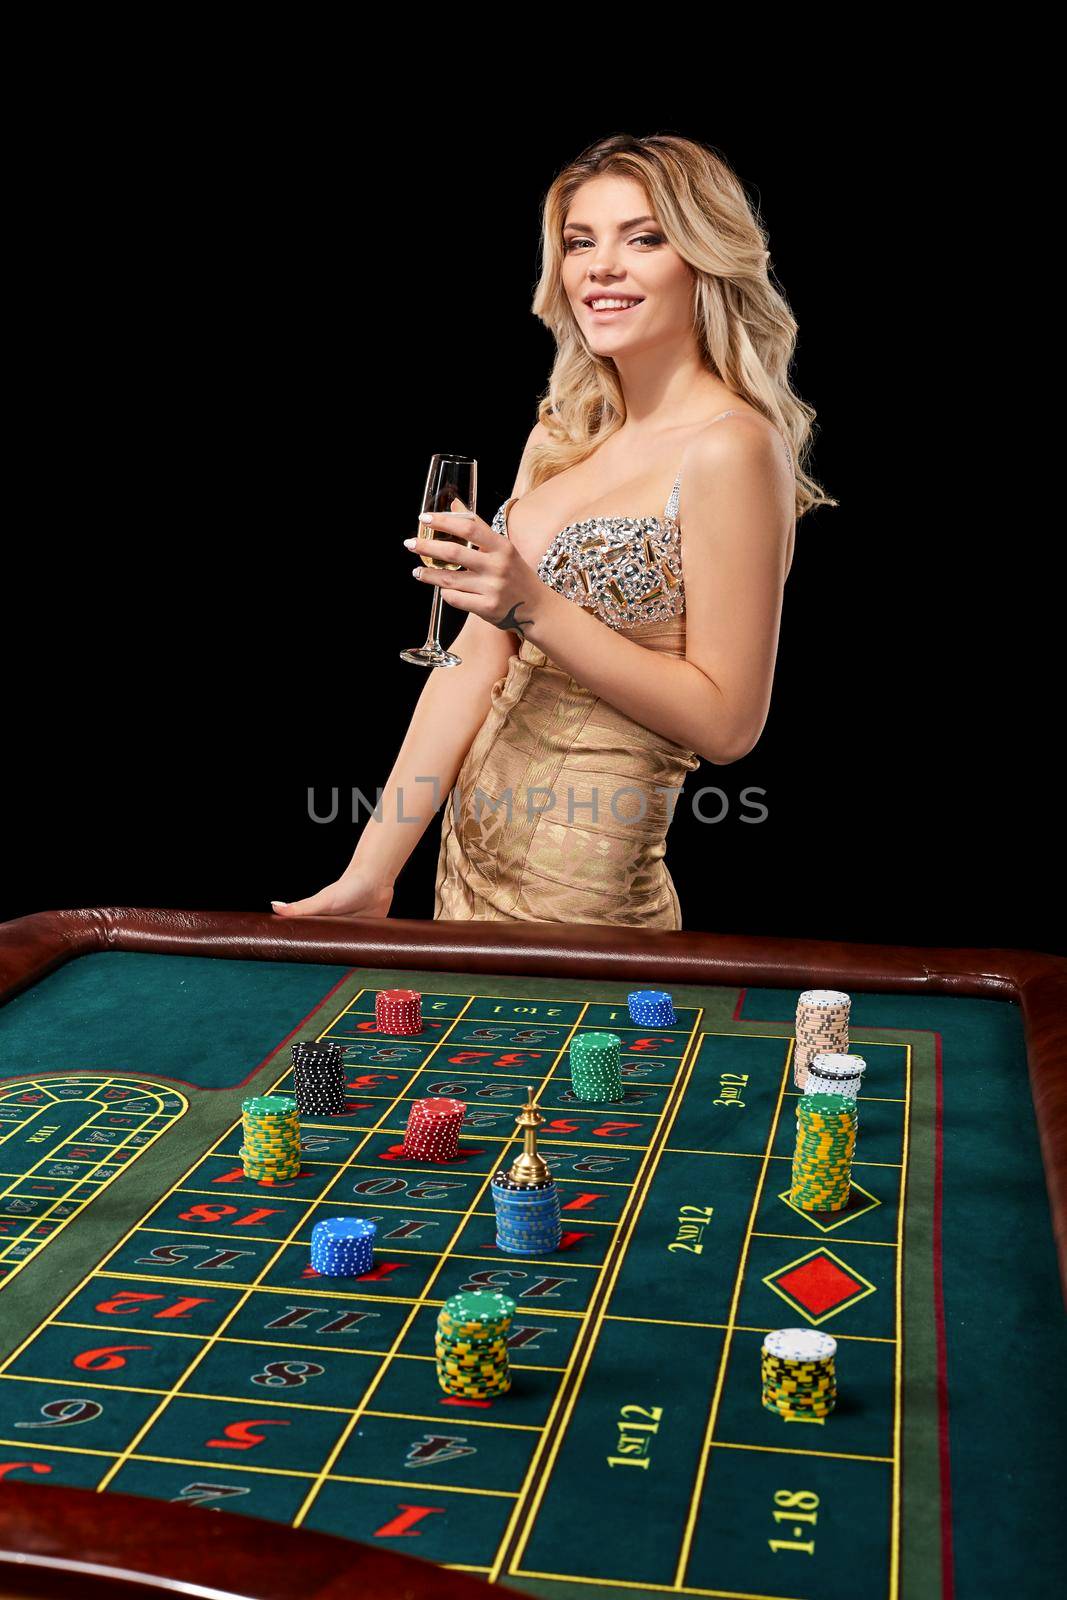 woman in a smart dress plays roulette. addiction to gambling. holding hands in a glass